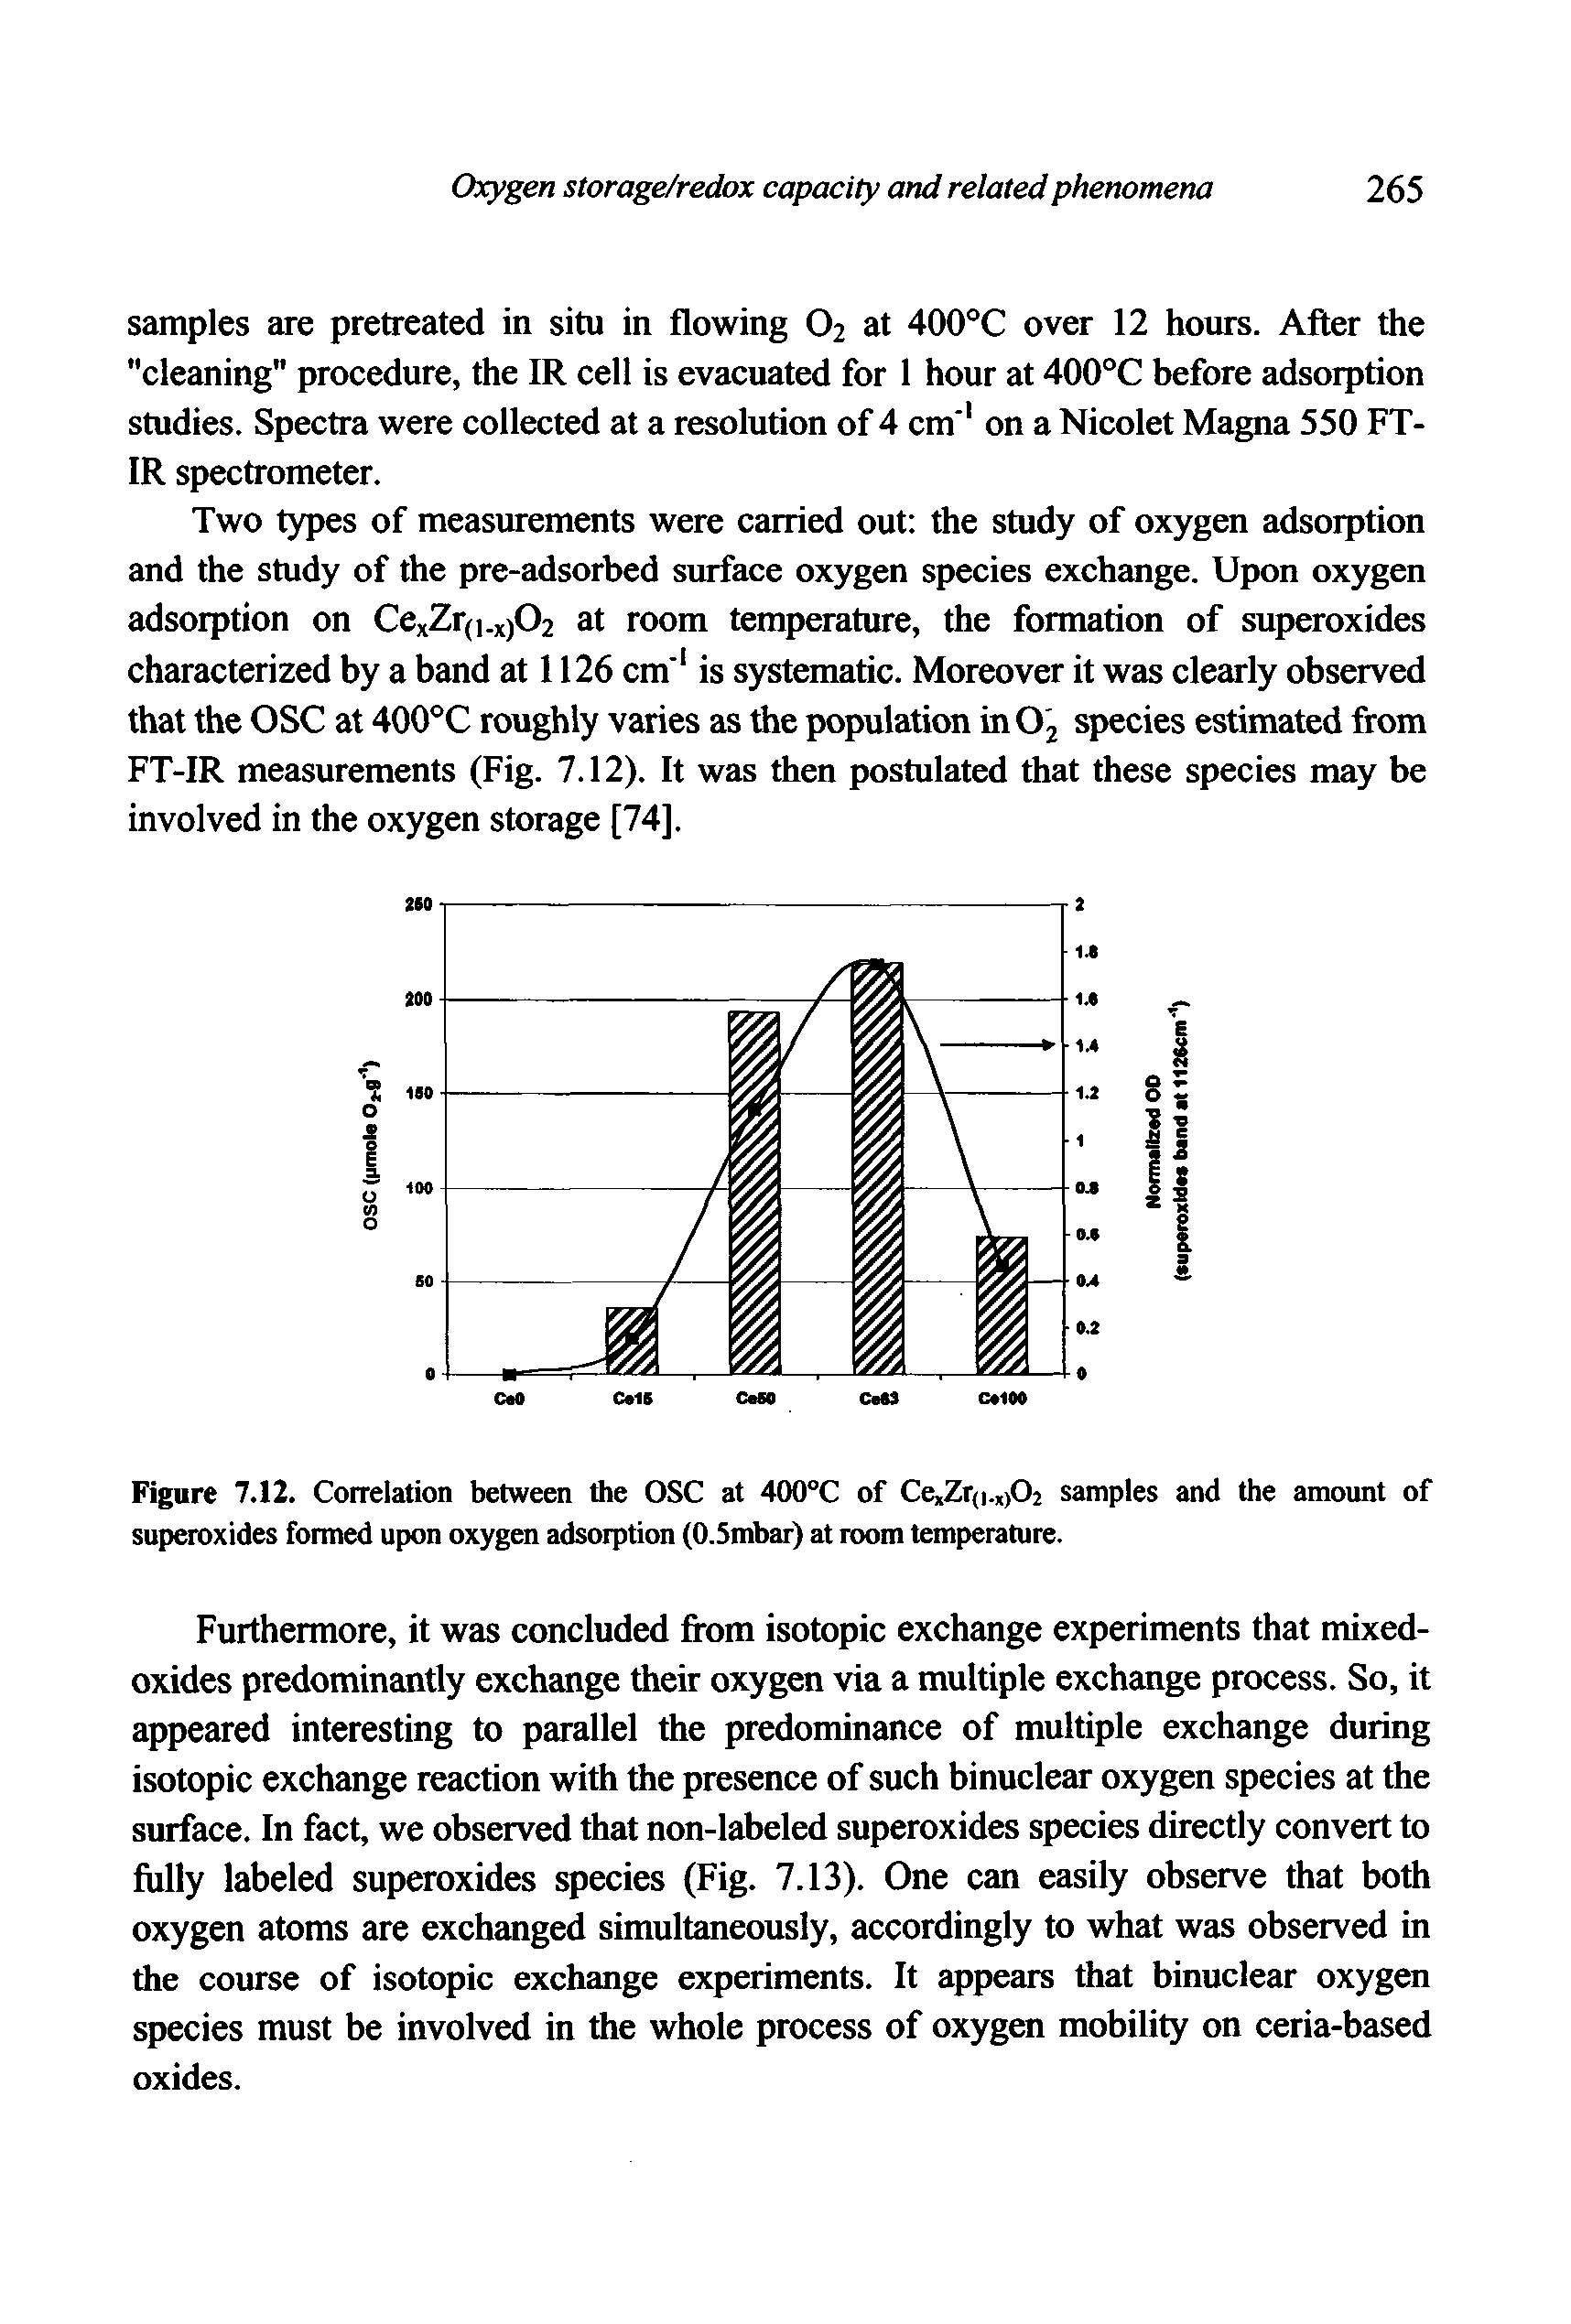 Figure 7.12. Correlation between the OSC at 400°C of Ce,Zr(i.,)02 samples and the amount of superoxides formed upon oxygen adsorption (O.Smbar) at room temperature.